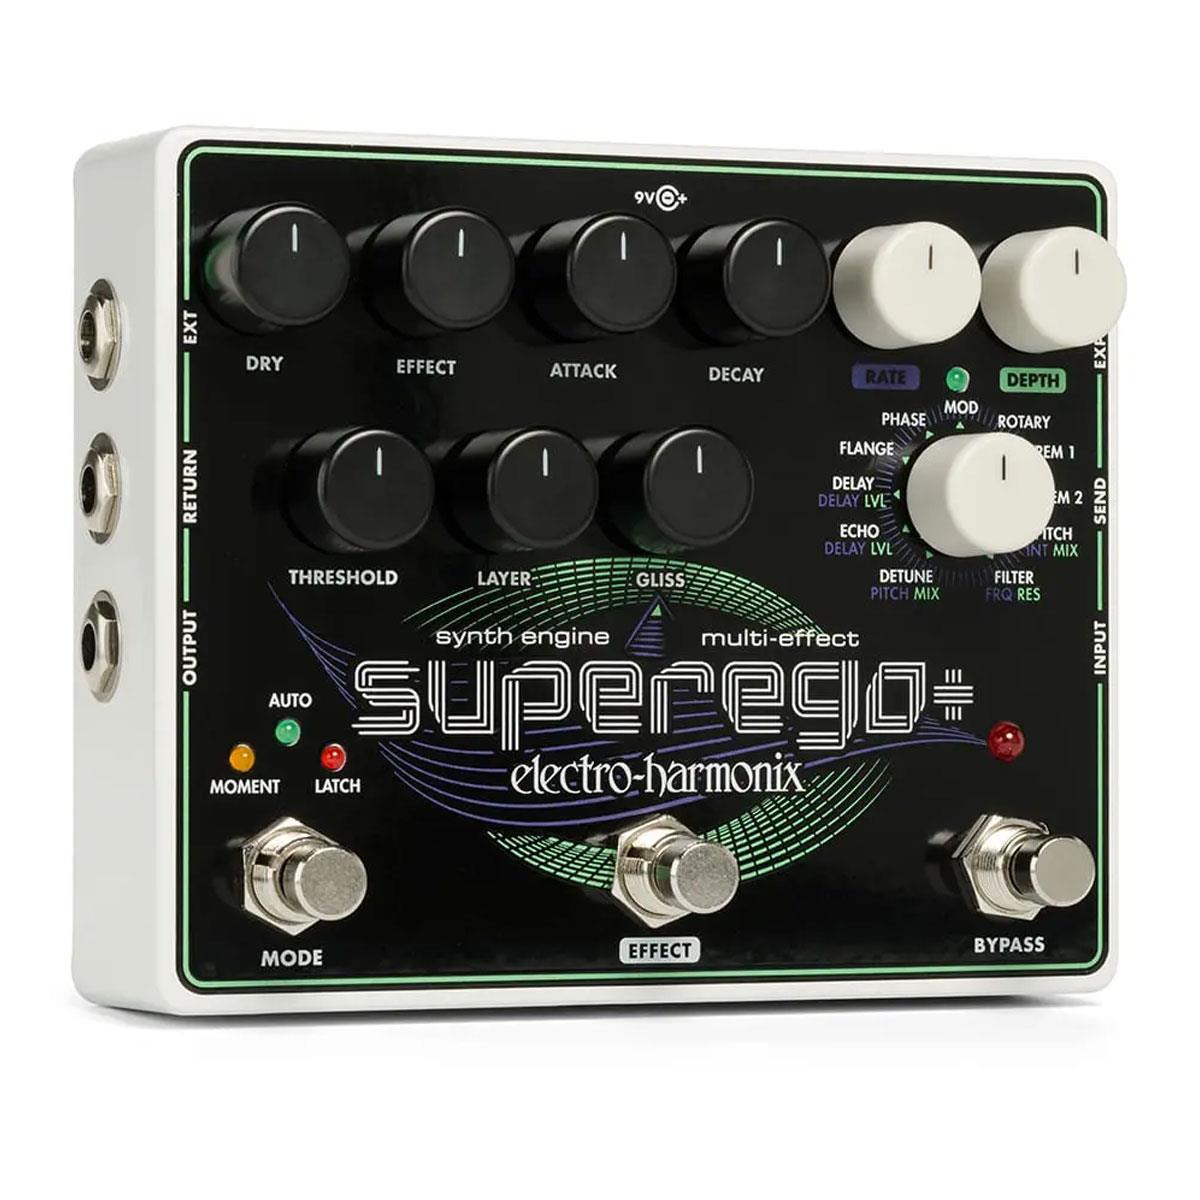 Image of Electro-Harmonix Superego+ Synth Engine and Multi-Effects Pedal